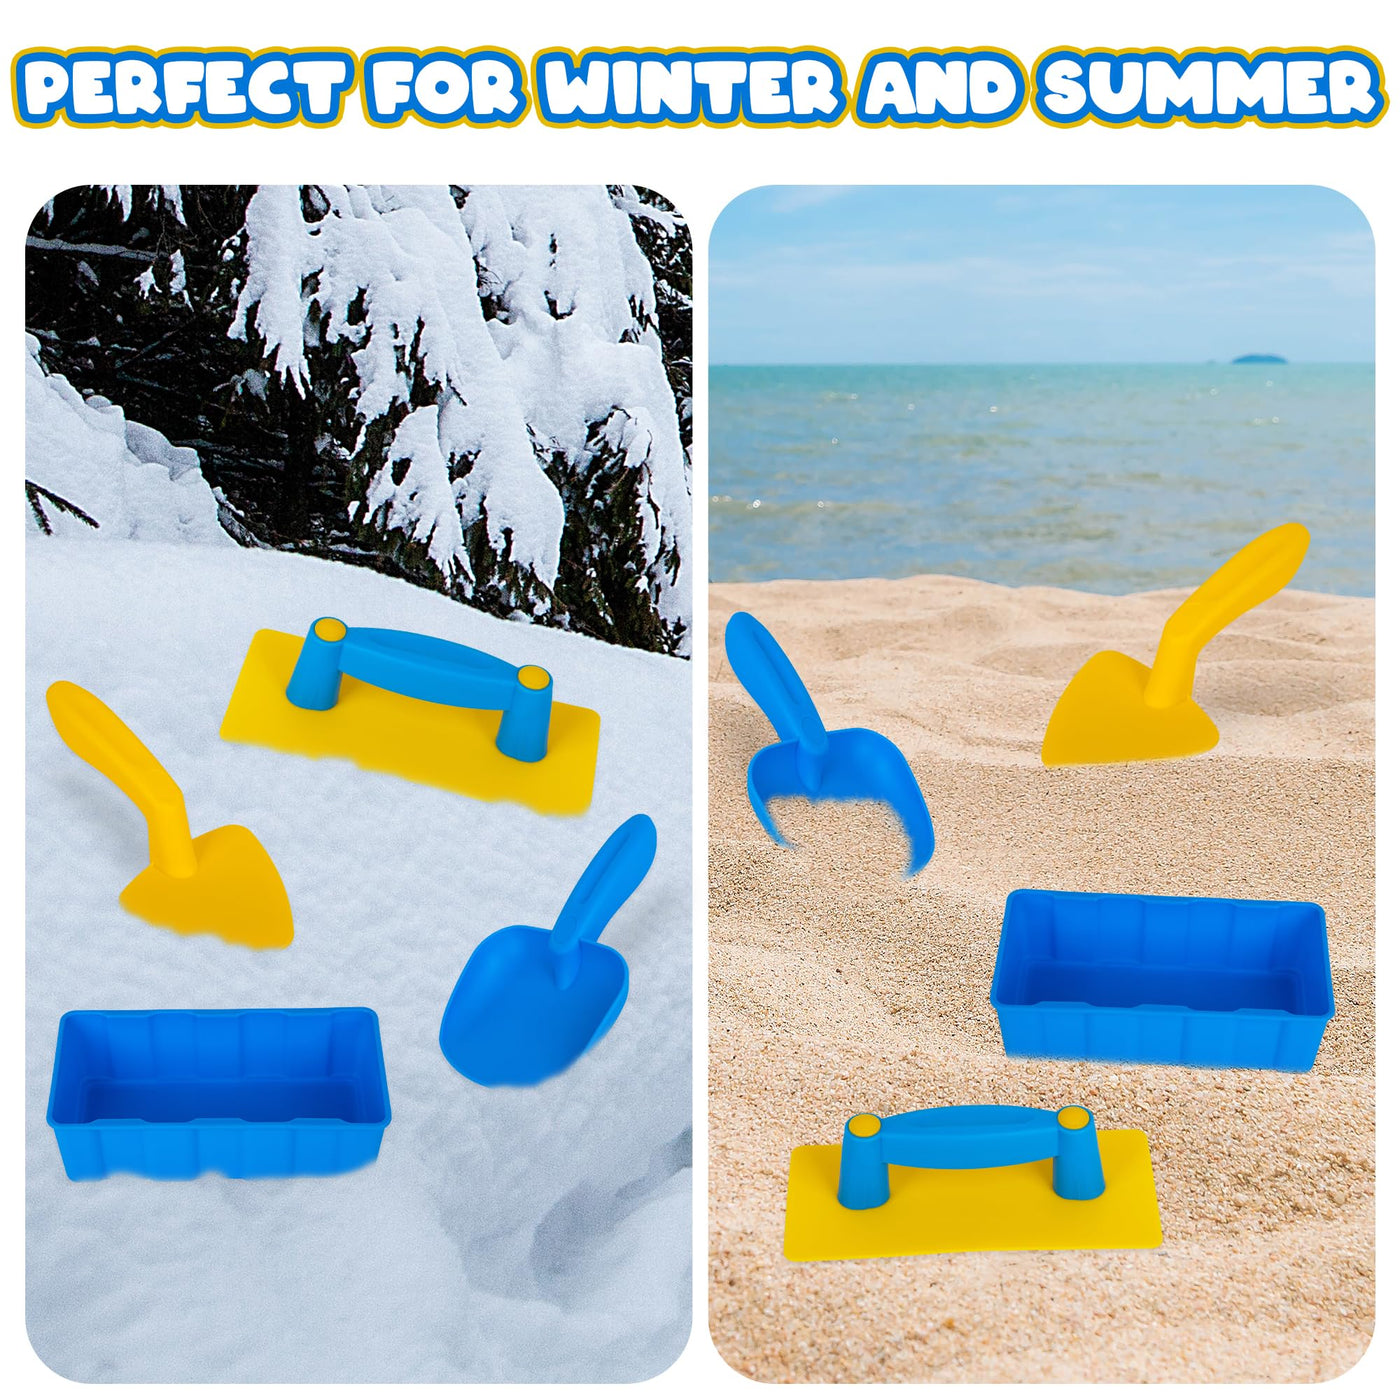 Snow Brick Maker for Kids - 4 Piece Snow Toy Set - Outdoor Snow Block Playset for Igloo Building with 2 Shovels, Snow Brick Mold, and Leveler